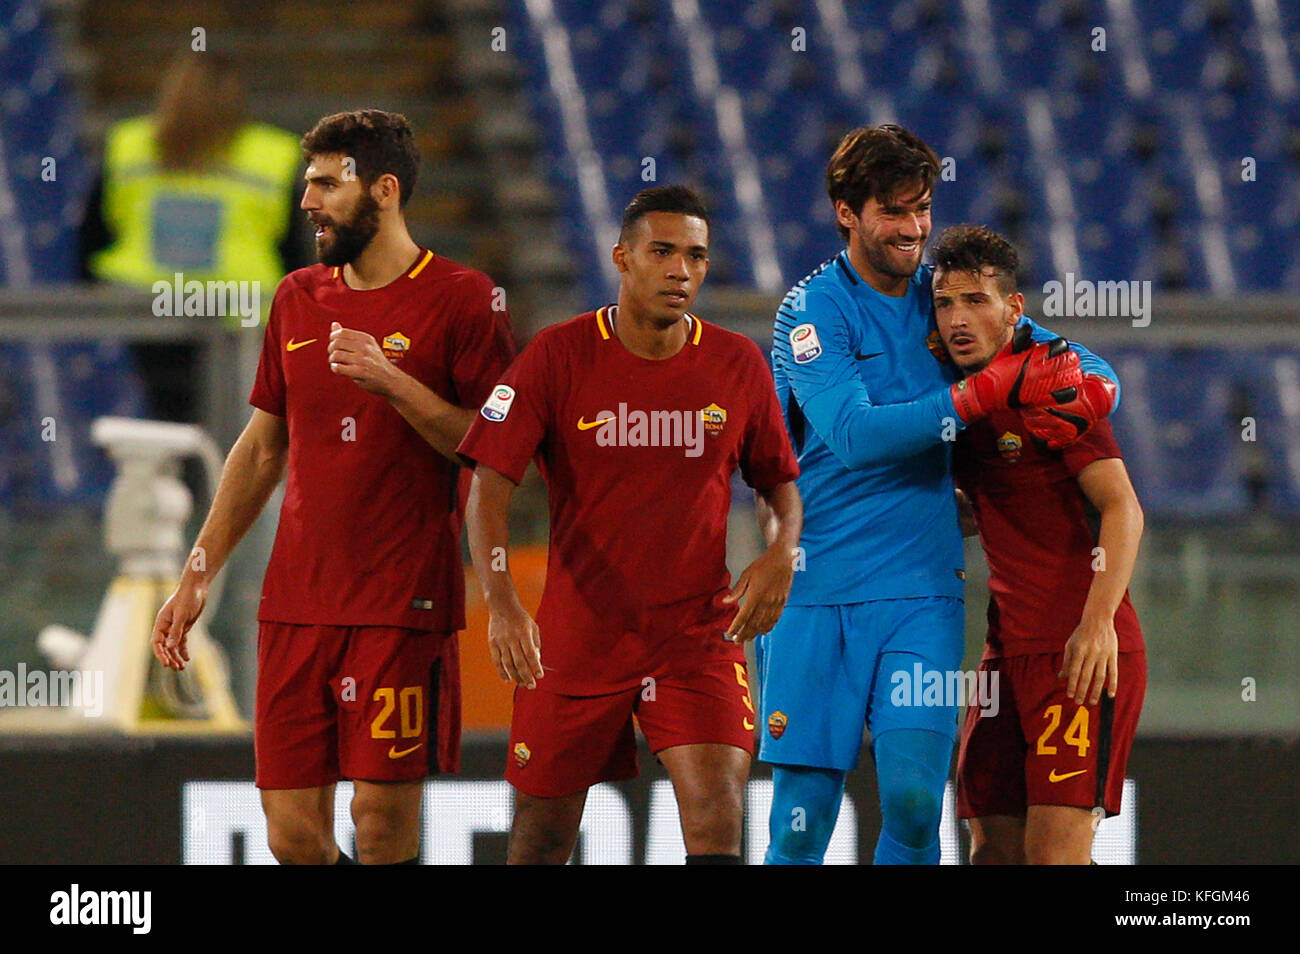 From left, Roma s Federico Fazio, Juan Jesus, Alisson Becker and Alessandro Florenzi celebrate at the end of the Serie A soccer match between Roma and Bologna at the Olympic stadium. Roma won 1-0. (Photo by Riccardo De Luca / Pacific Press) Stock Photo